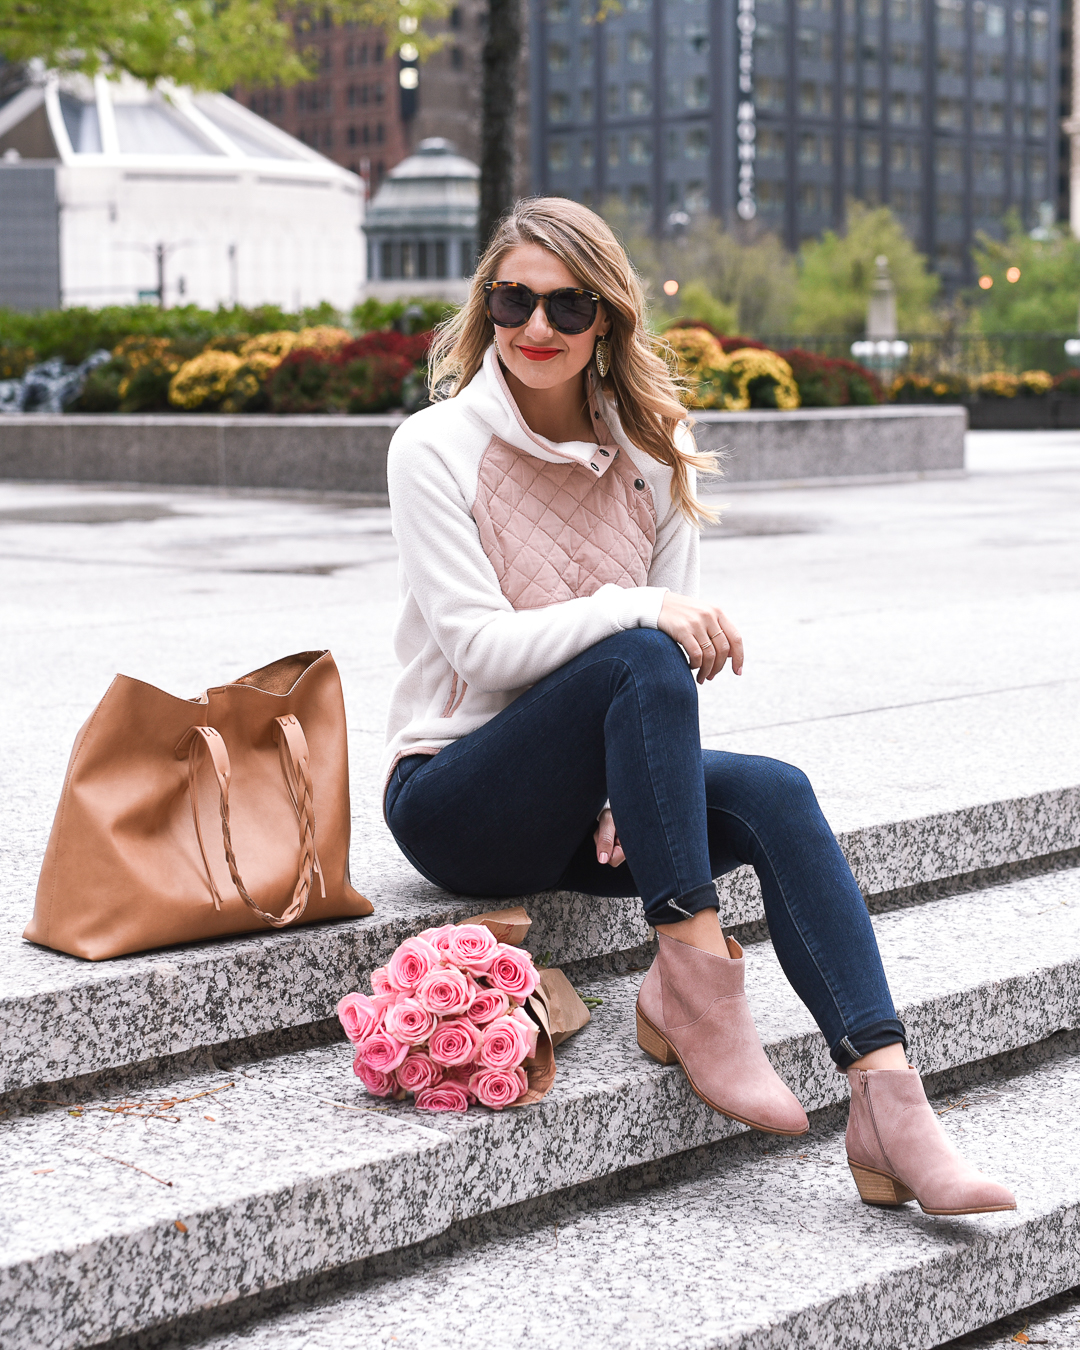 suede ankle boots outfits